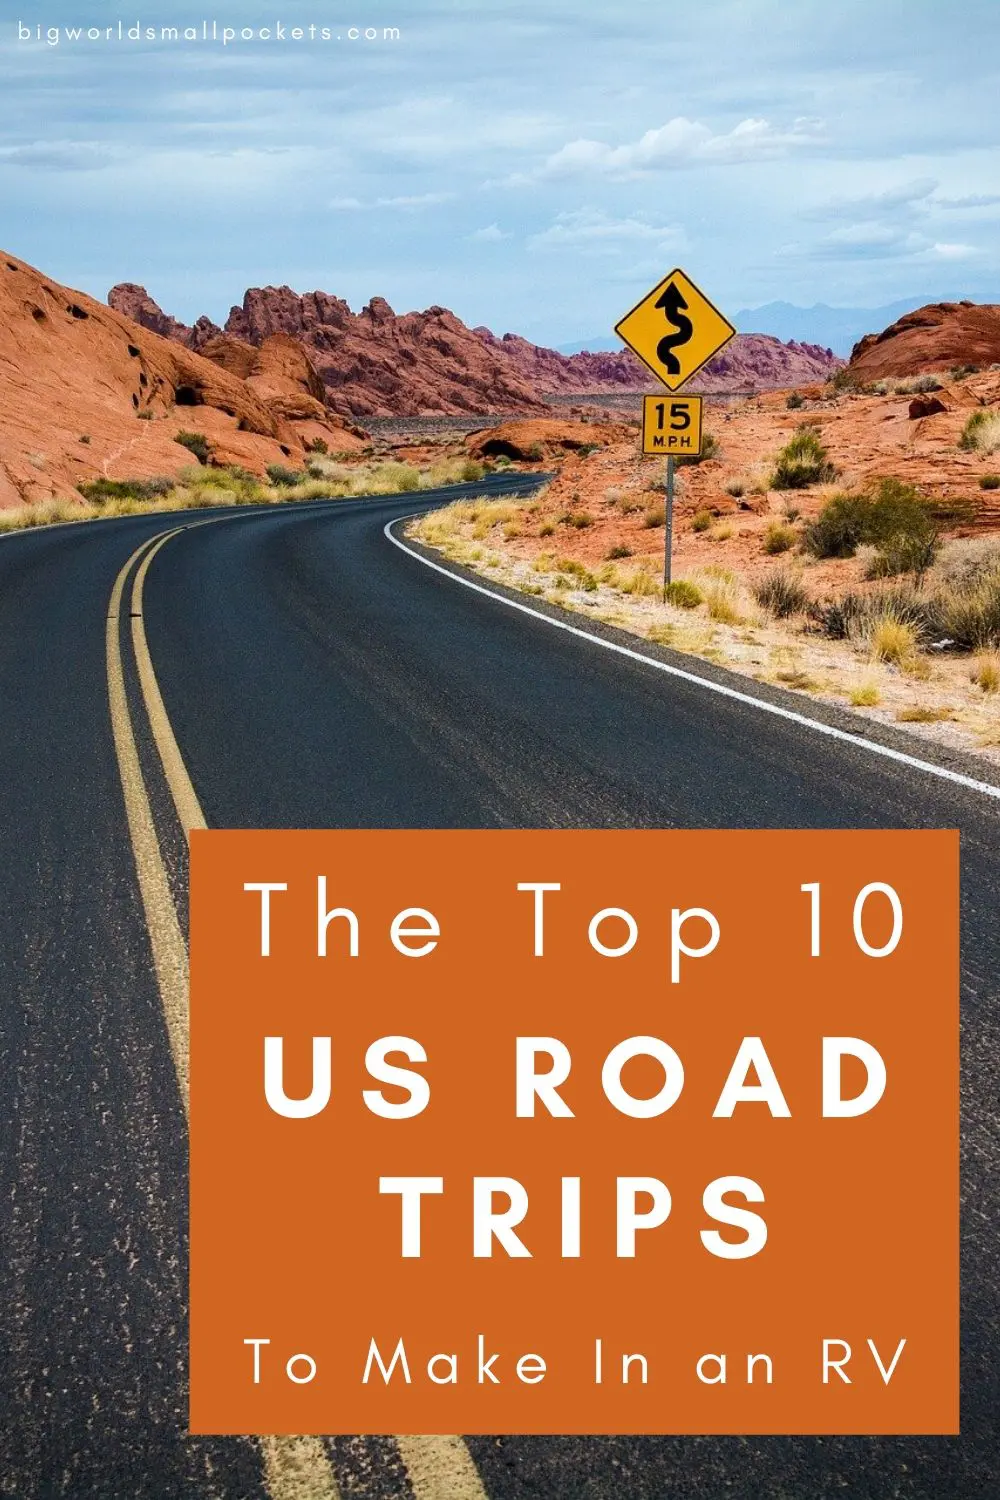 Anmelder Justerbar Udelade 10 BEST US Road Trips to Make in an RV - Big World Small Pockets